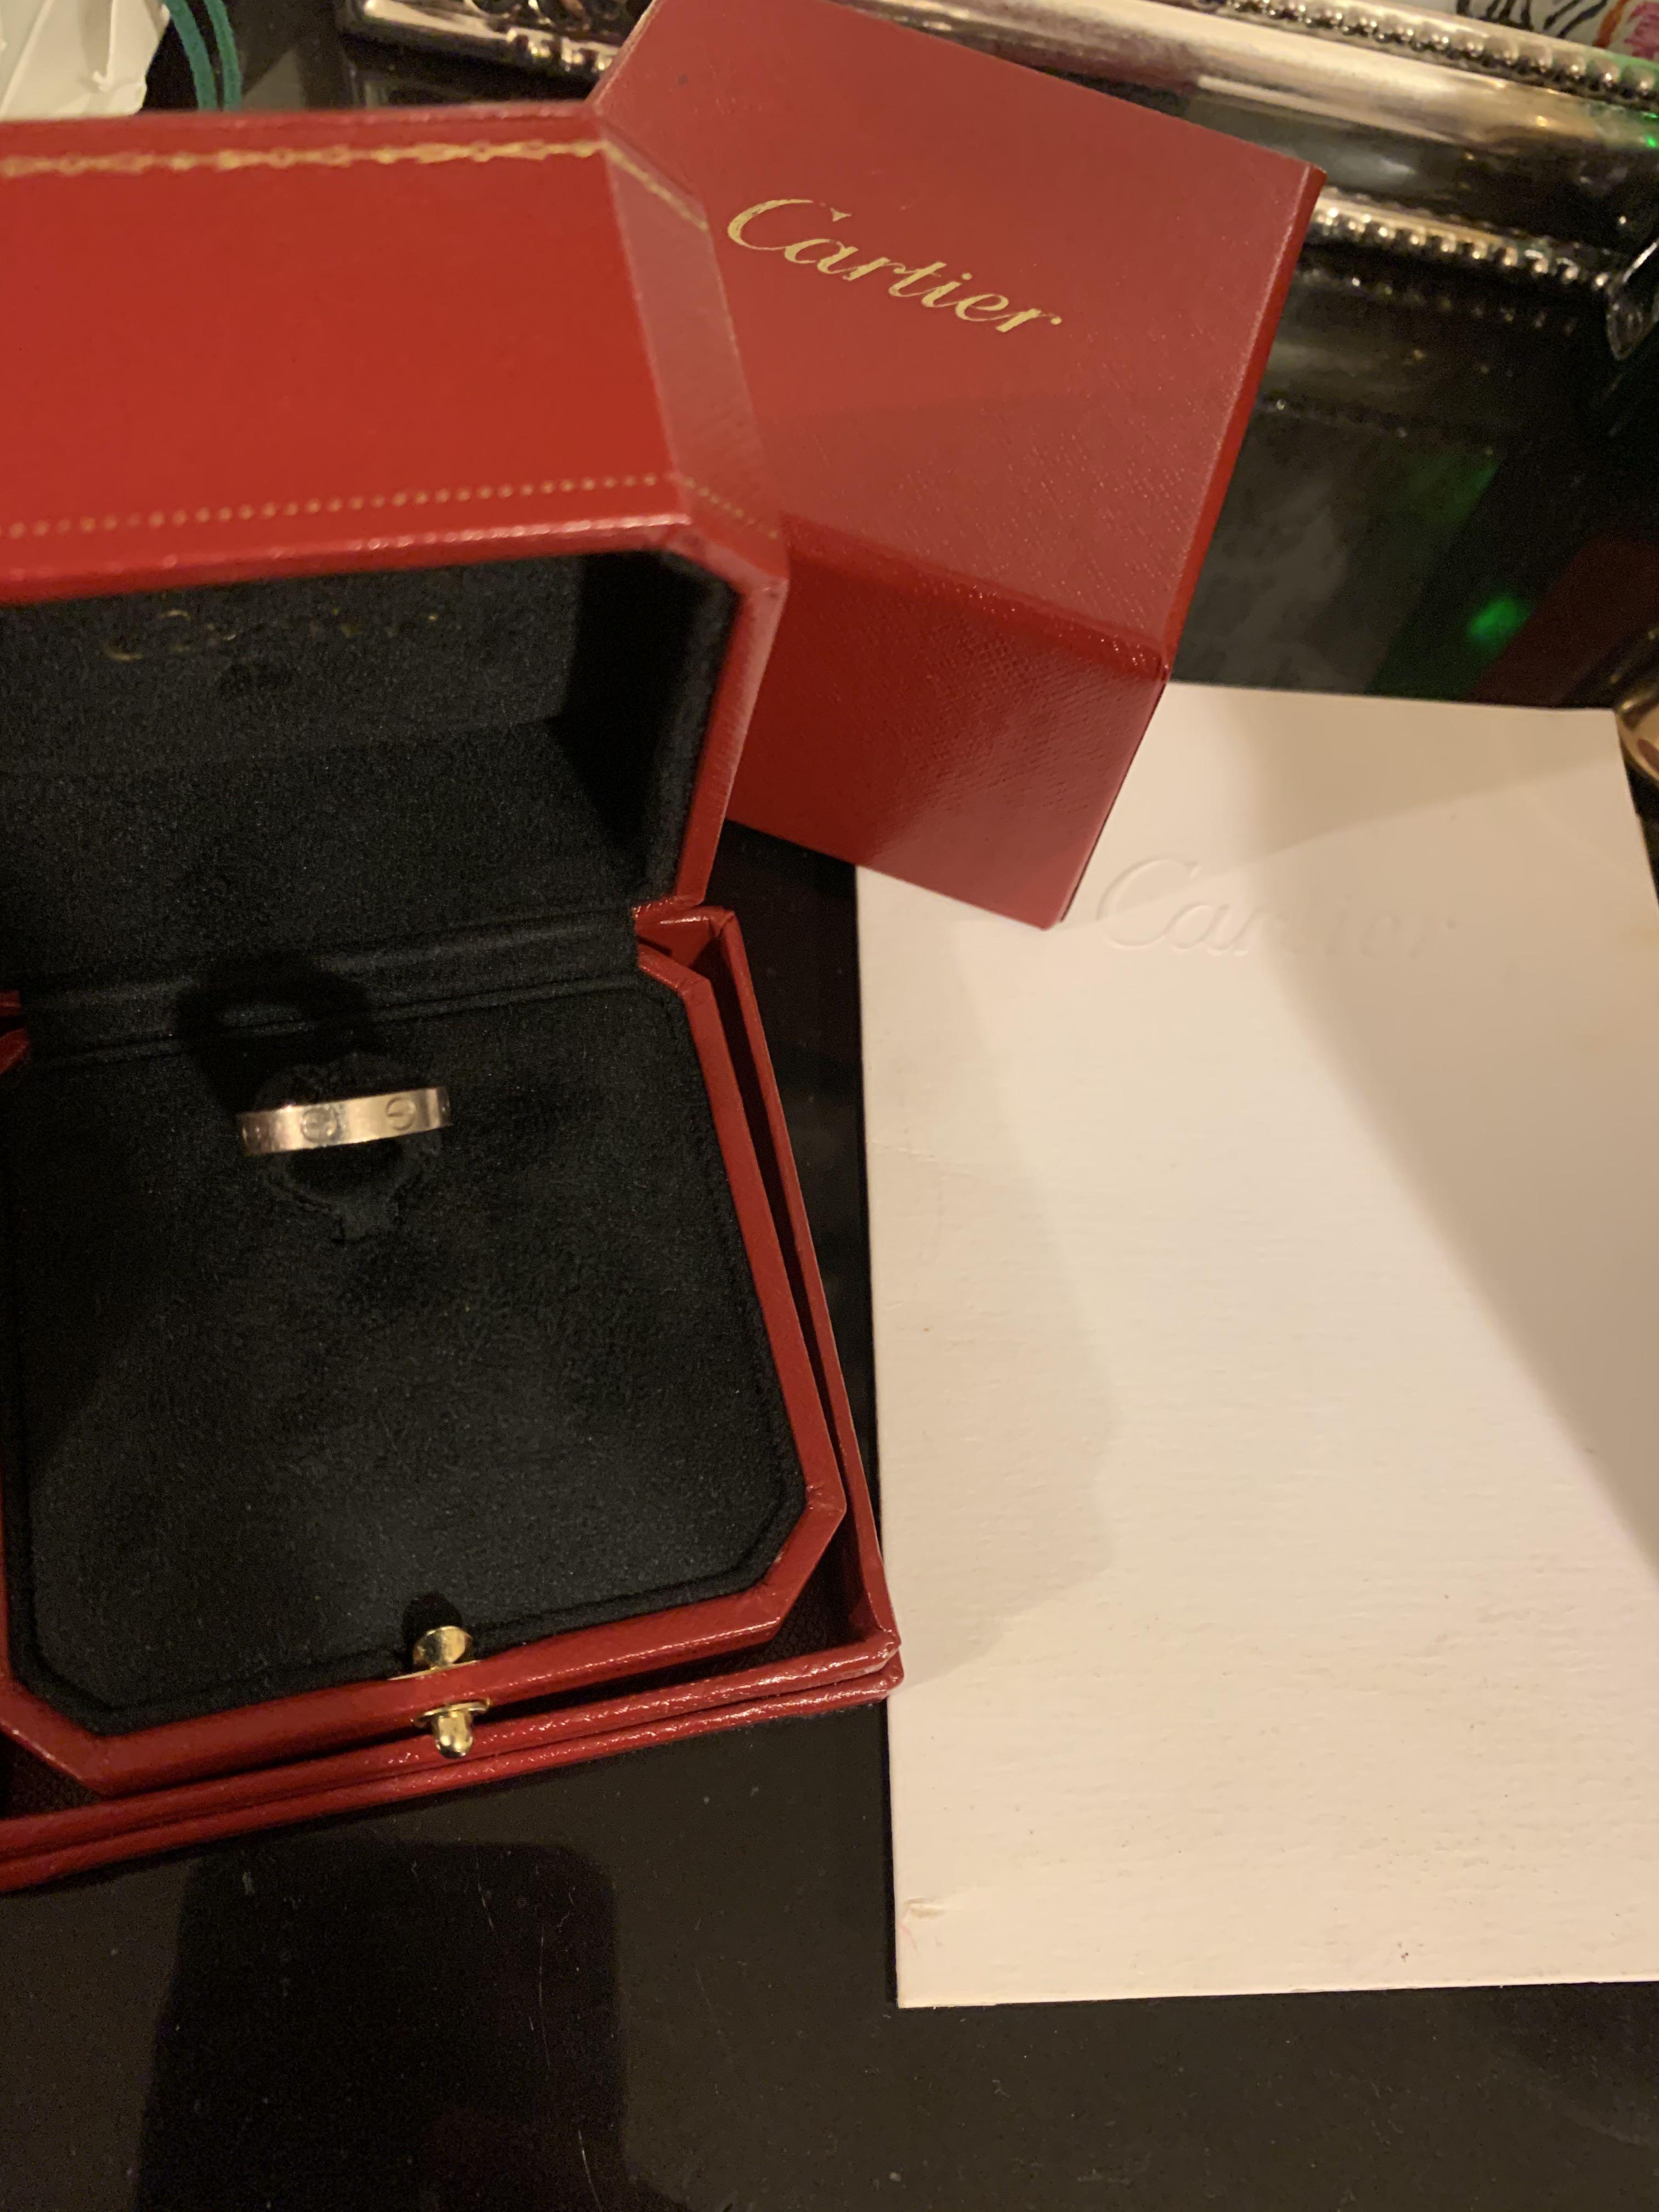 cartier ring used